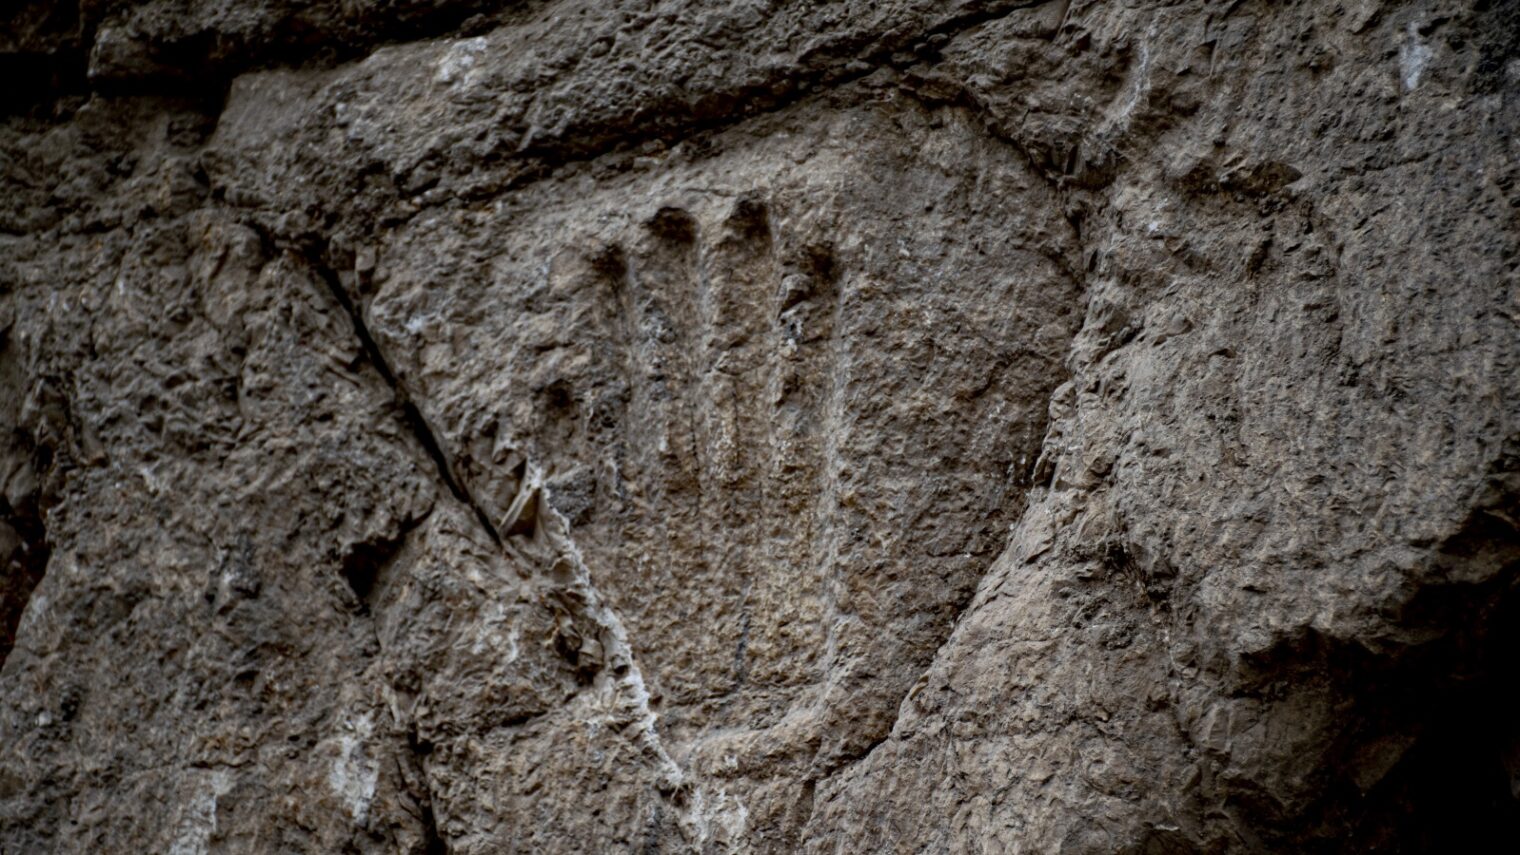 The carved hand on the moat wall. Photo by Yoli Schwartz/Israel Antiquities Authority